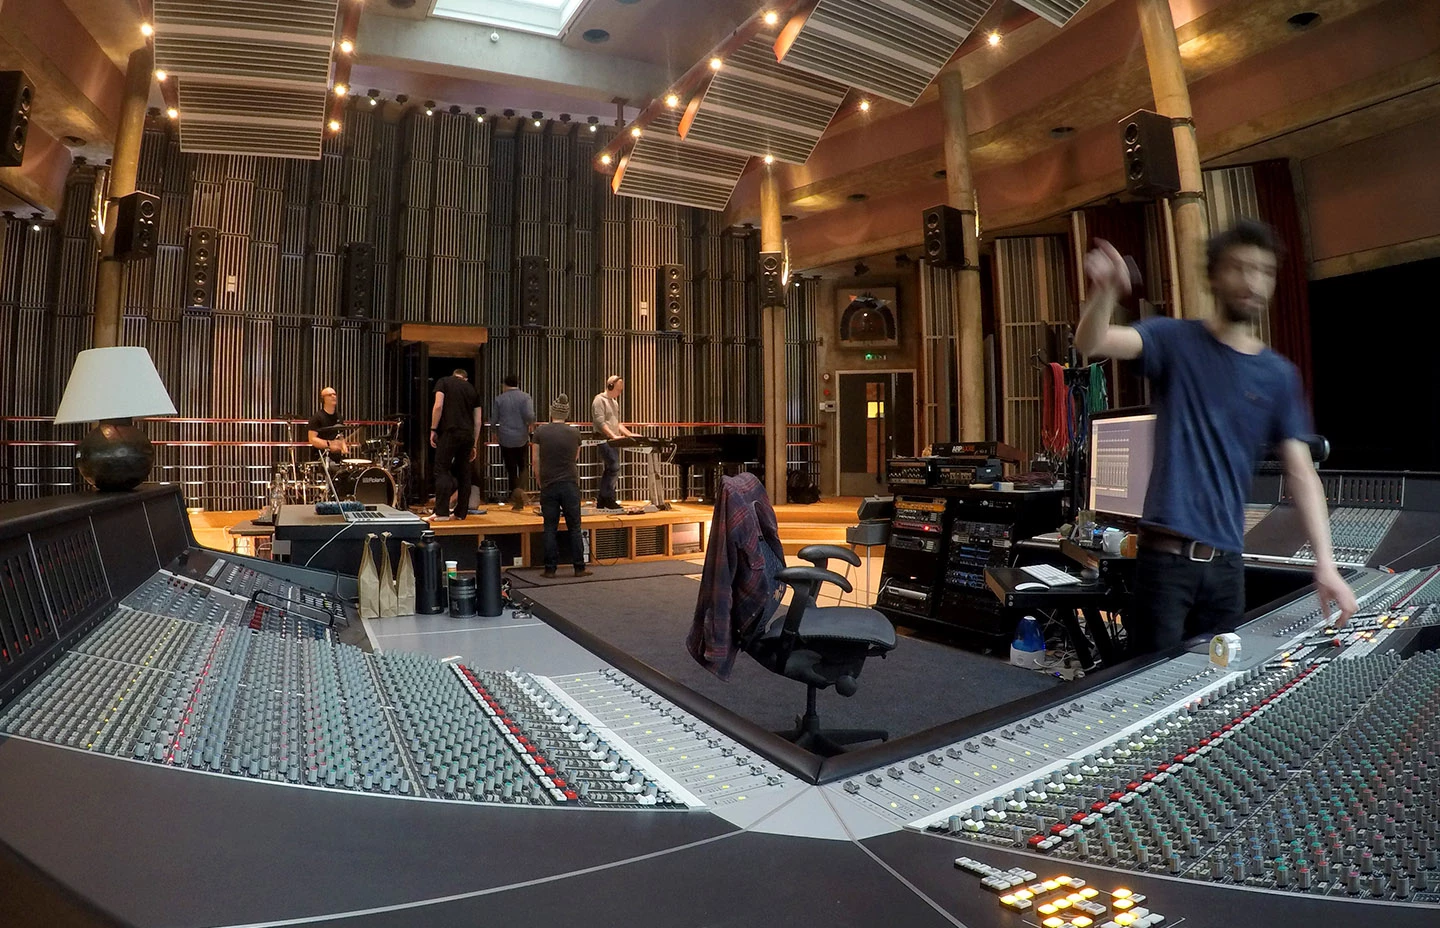 An image of a recording studio in use with a man at a mixing desk